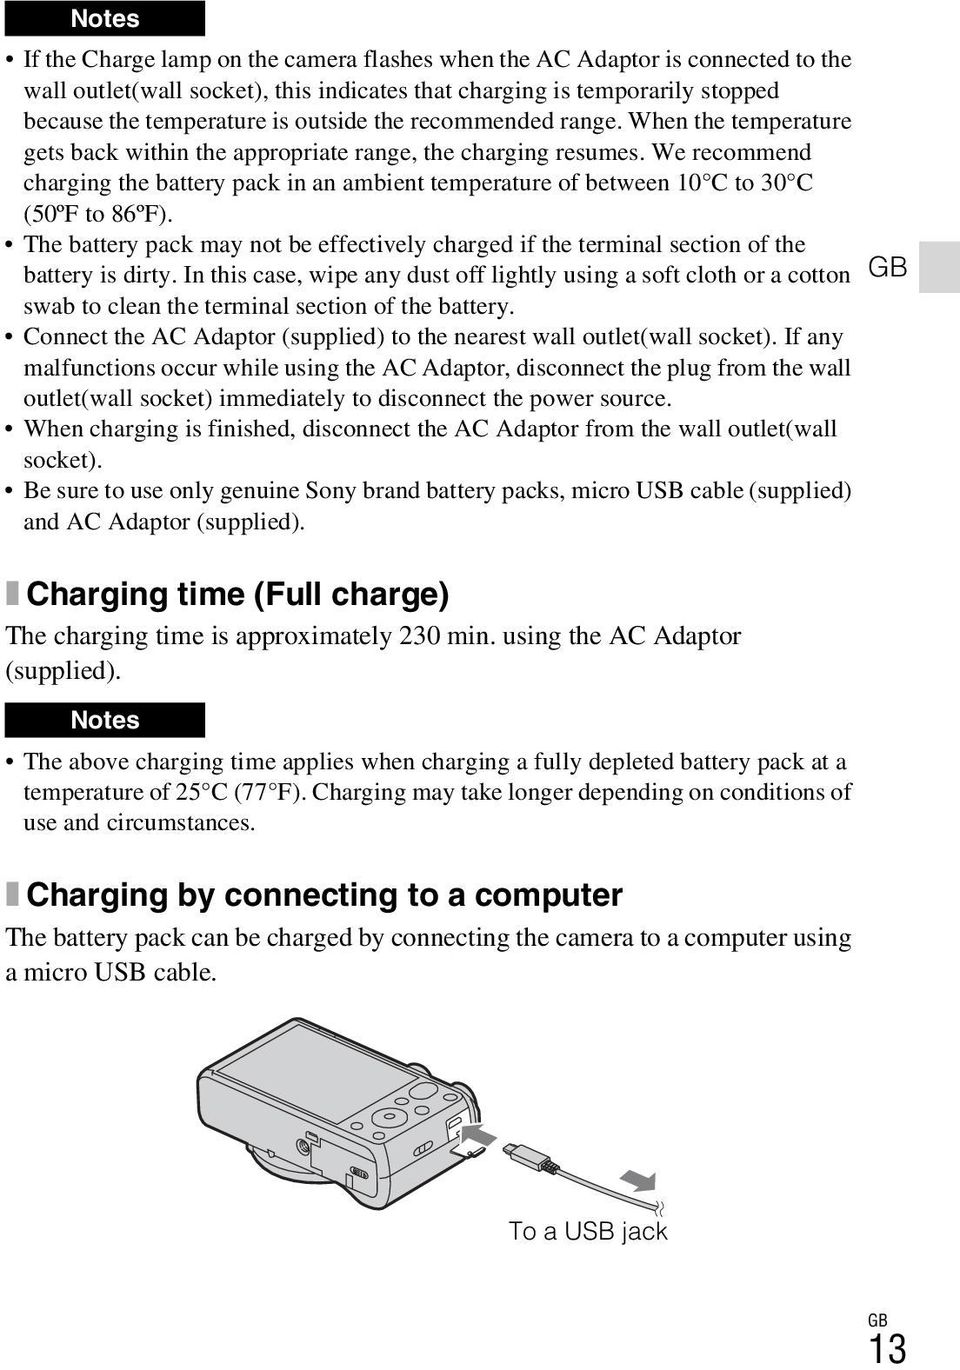 We recommend charging the battery pack in an ambient temperature of between 10 C to 30 C (50ºF to 86ºF).